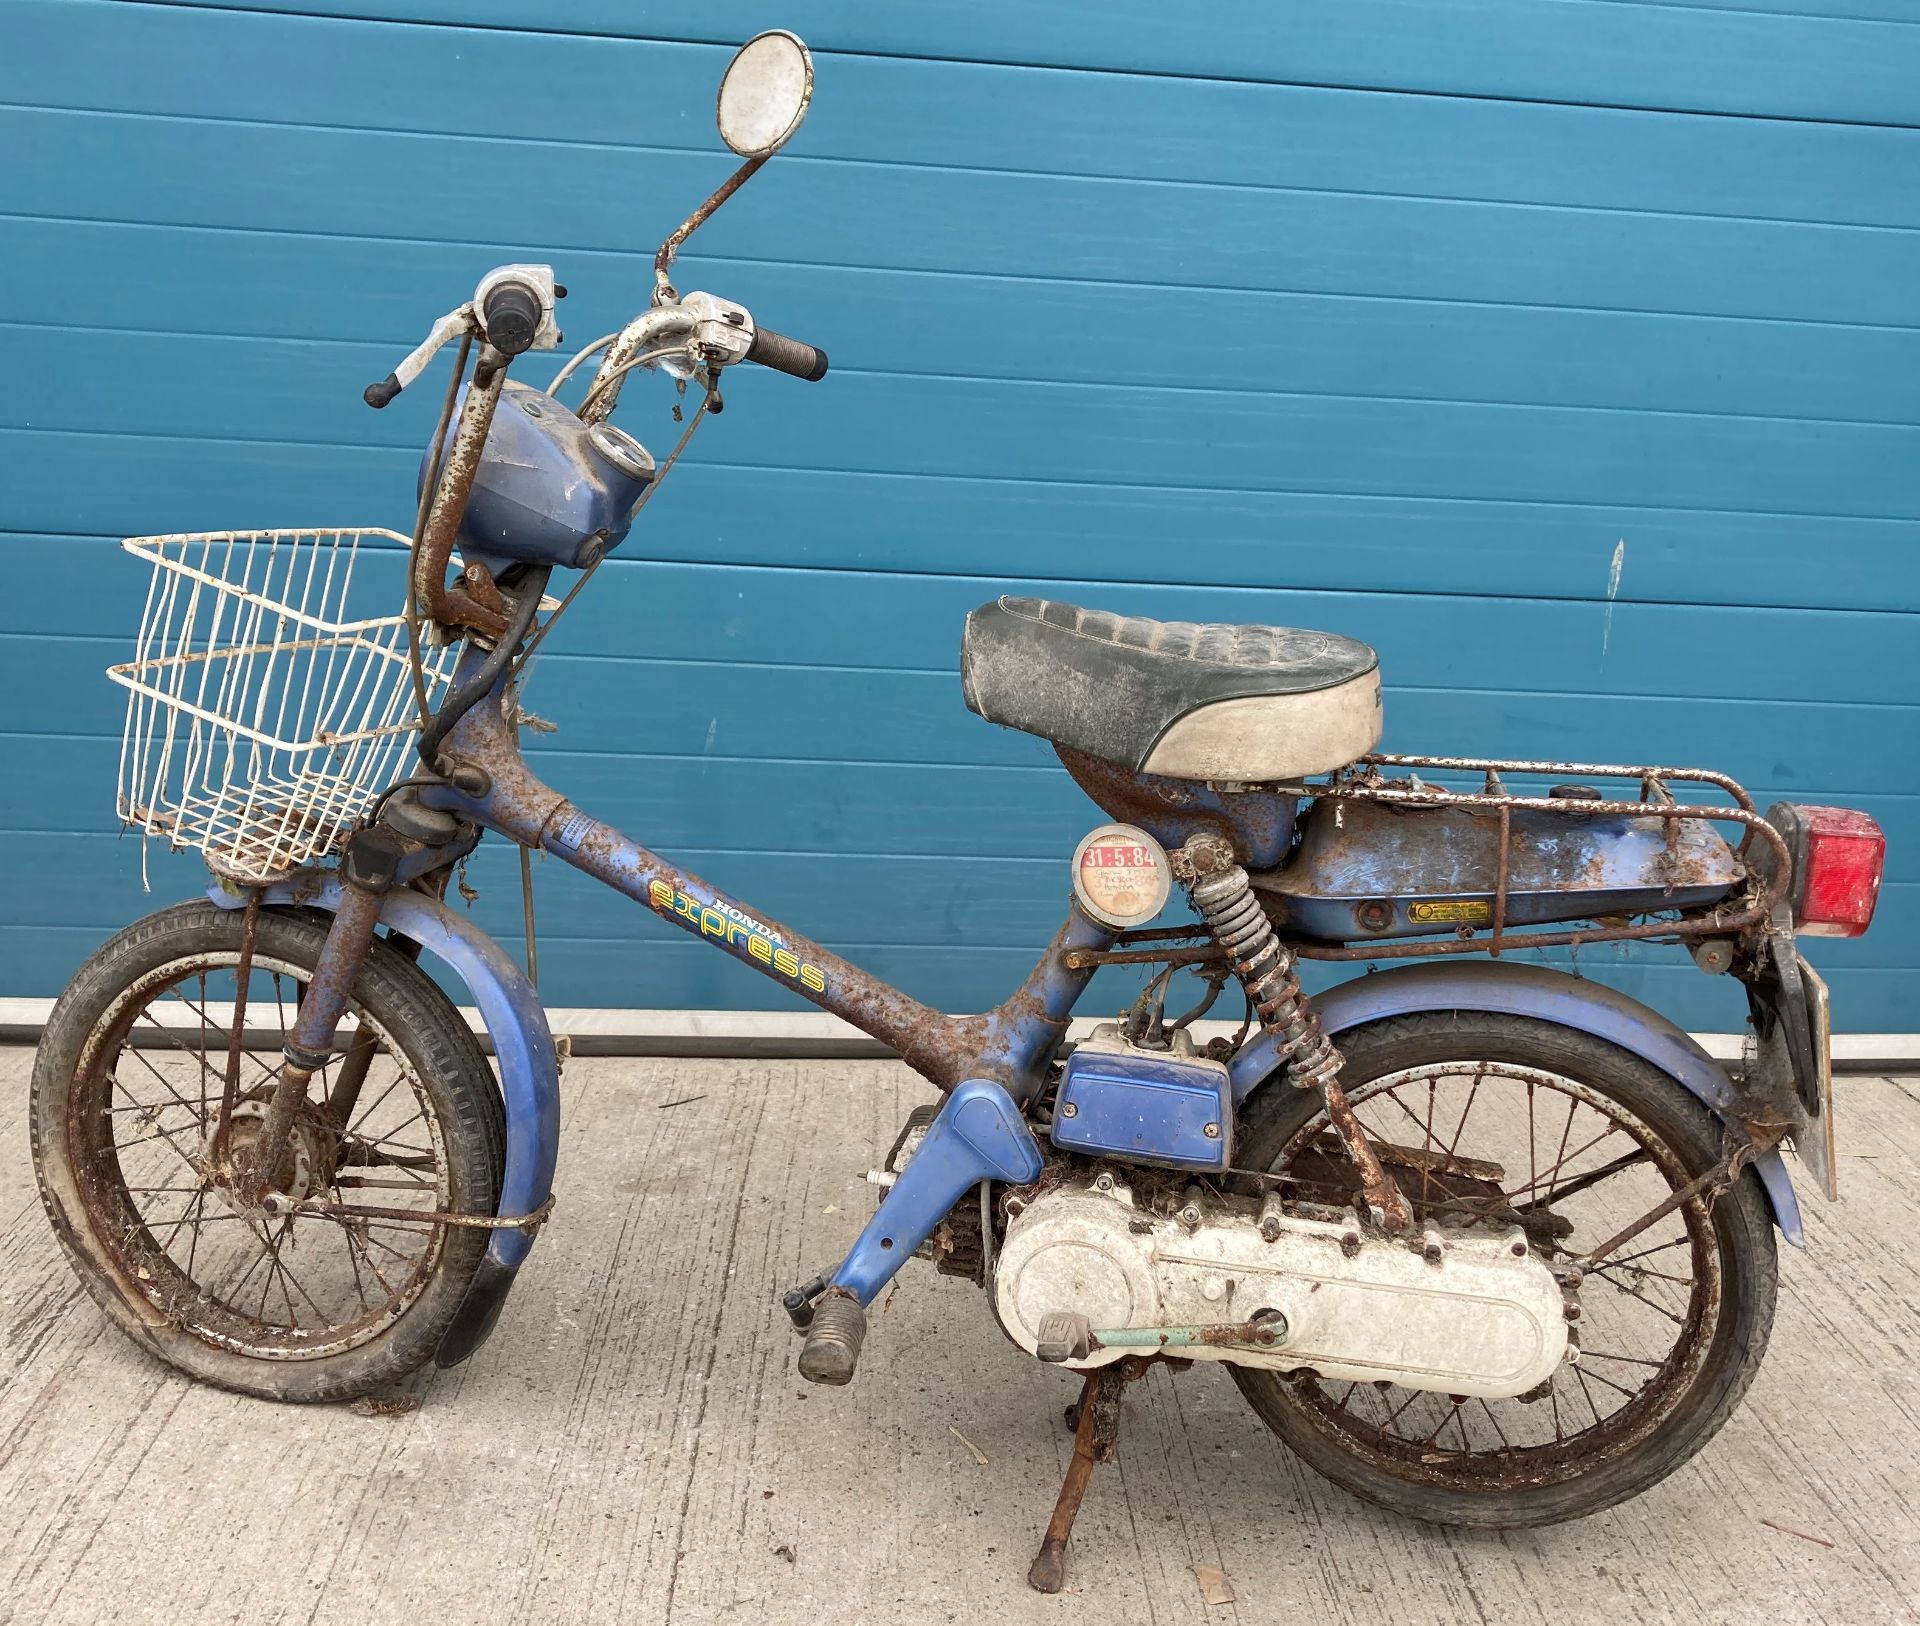 HONDA EXPRESS 49cc MOPED - Petrol - Blue. BARN FIND - From a deceased estate. Reg No: GWW 775T. - Image 2 of 10